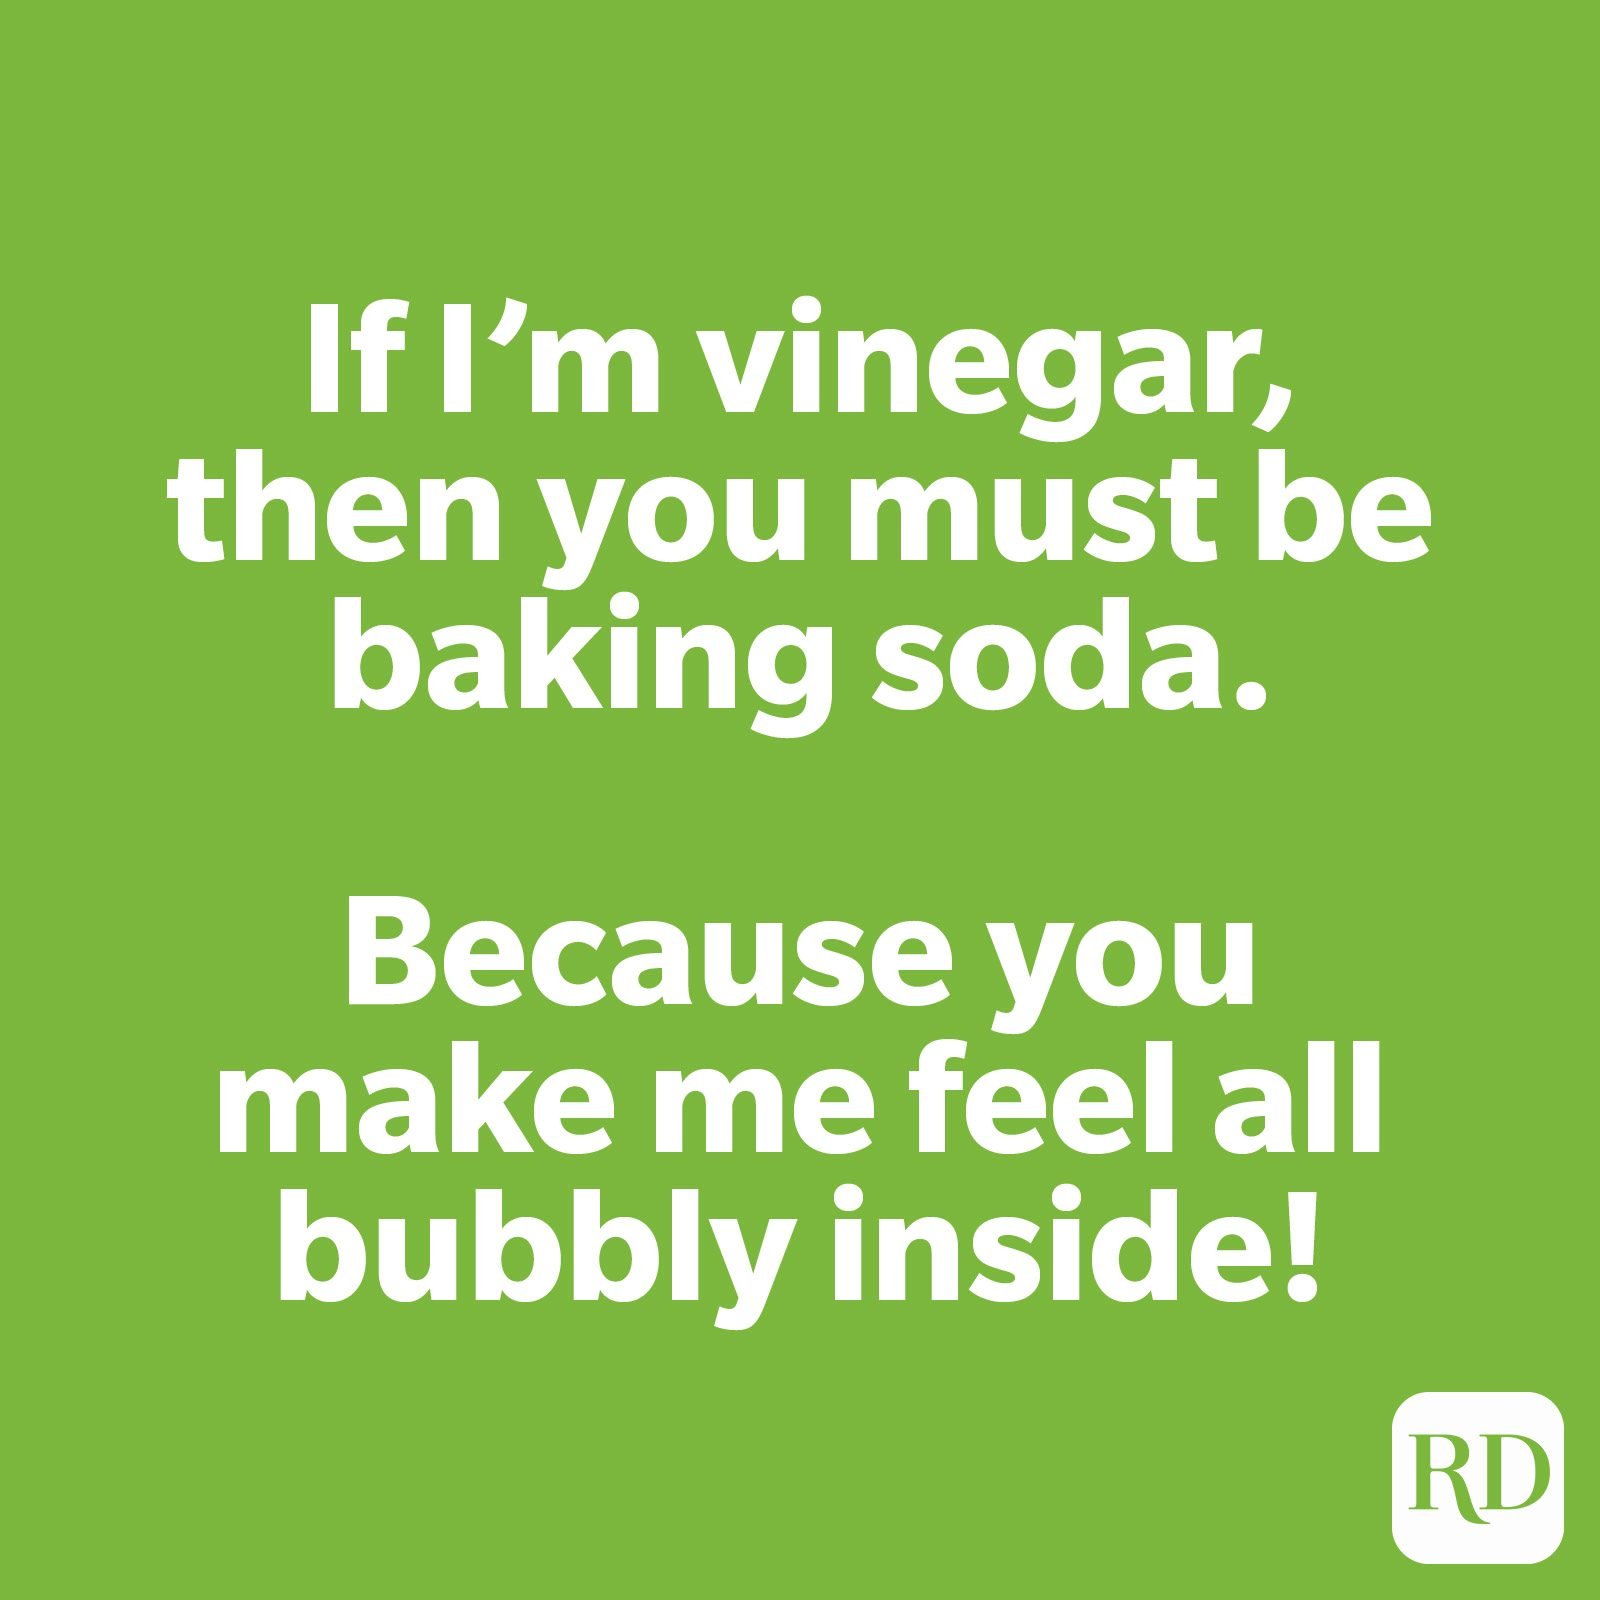 If I’m vinegar, then you must be baking soda. Because you make me feel all bubbly inside!